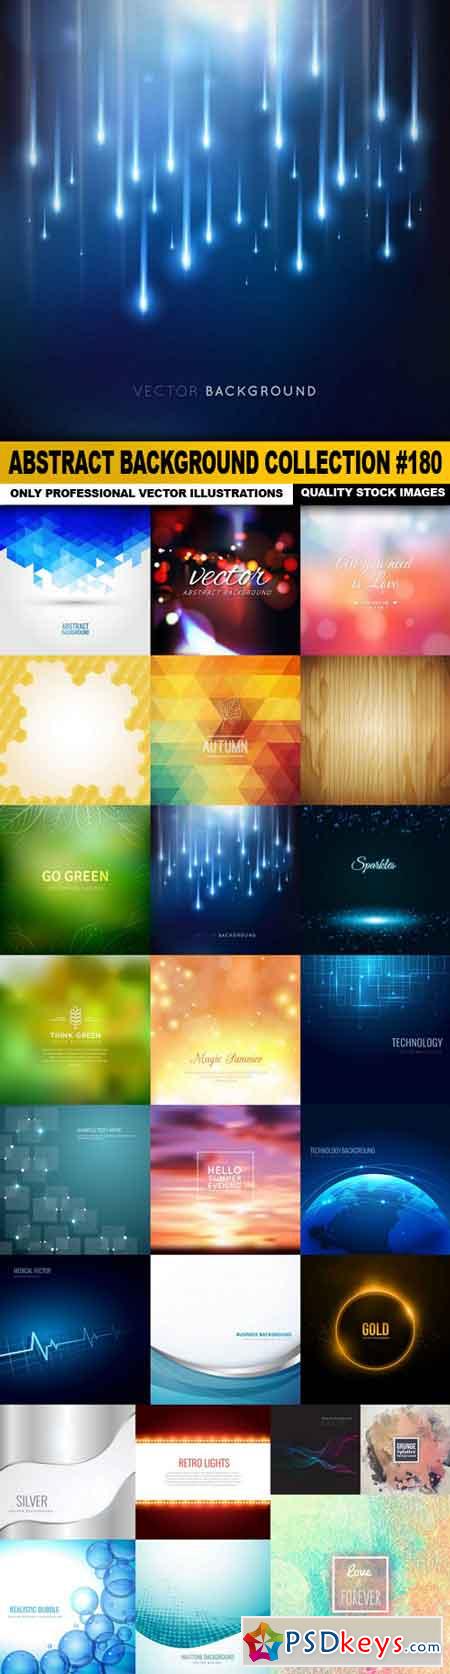 Abstract Background Collection #180 - 25 Vector